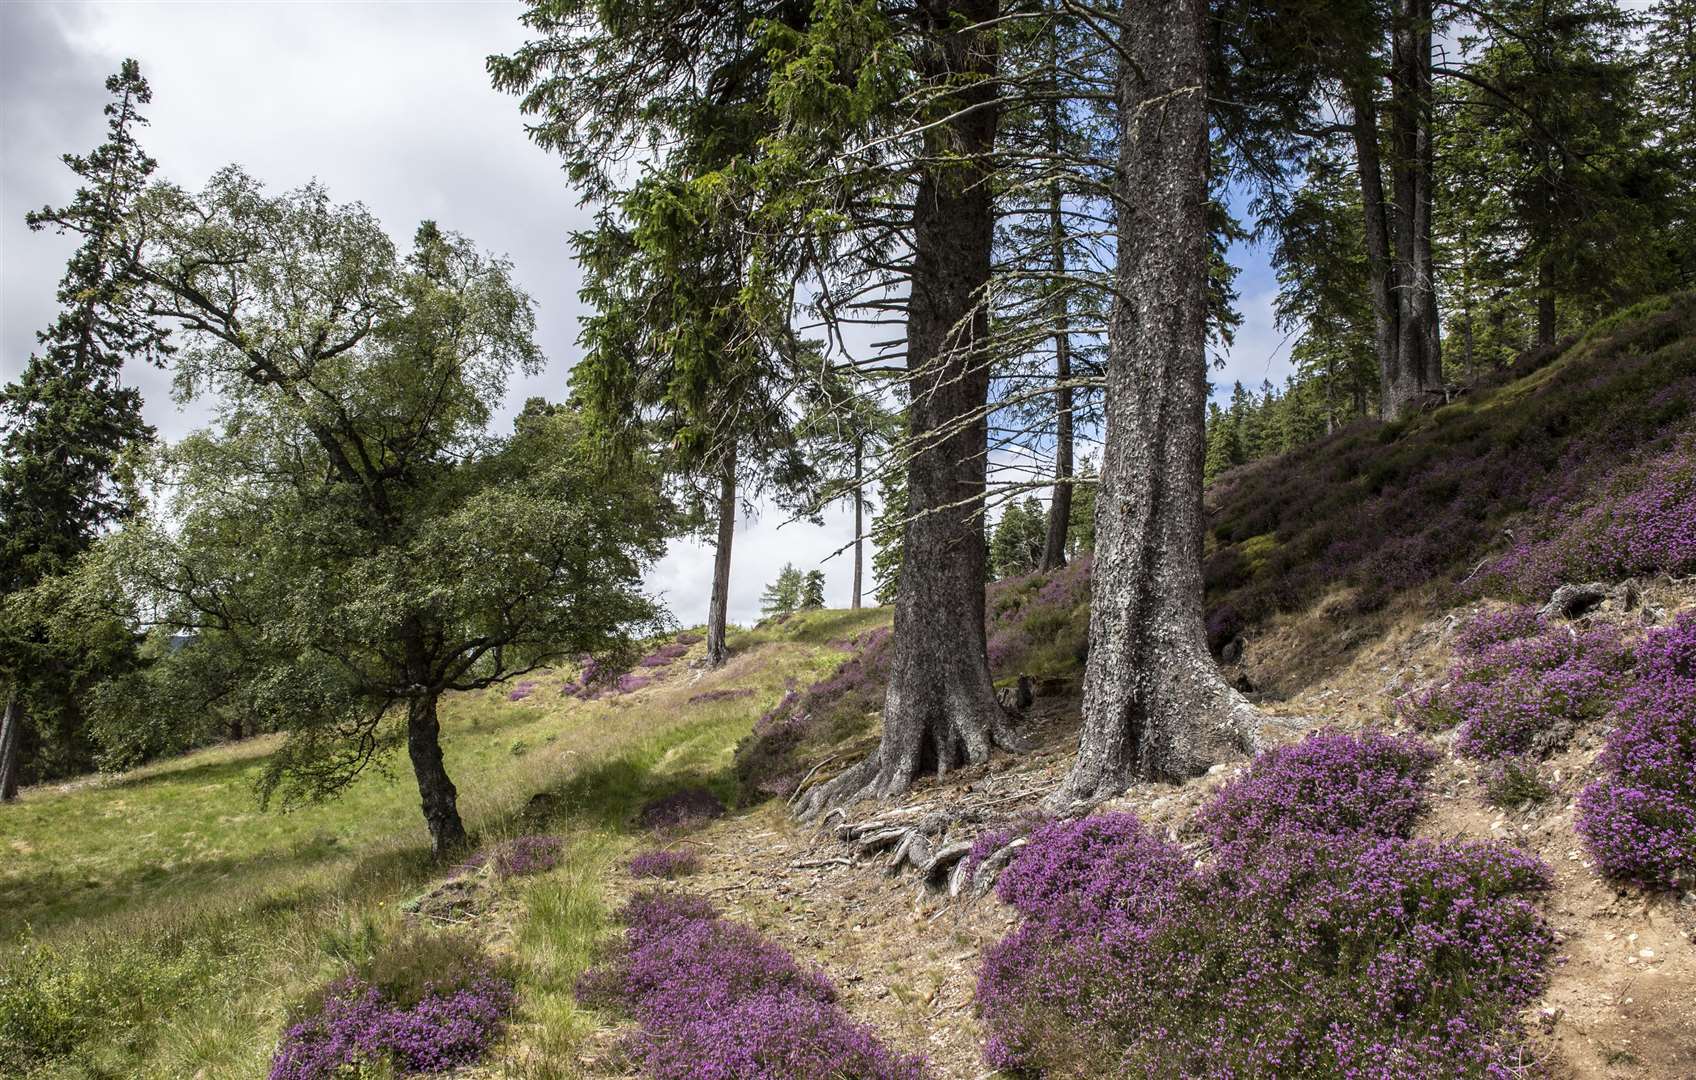 The restorative nature of the Cairngorms is clear to see. Picture: PA Photo/Fife Arms